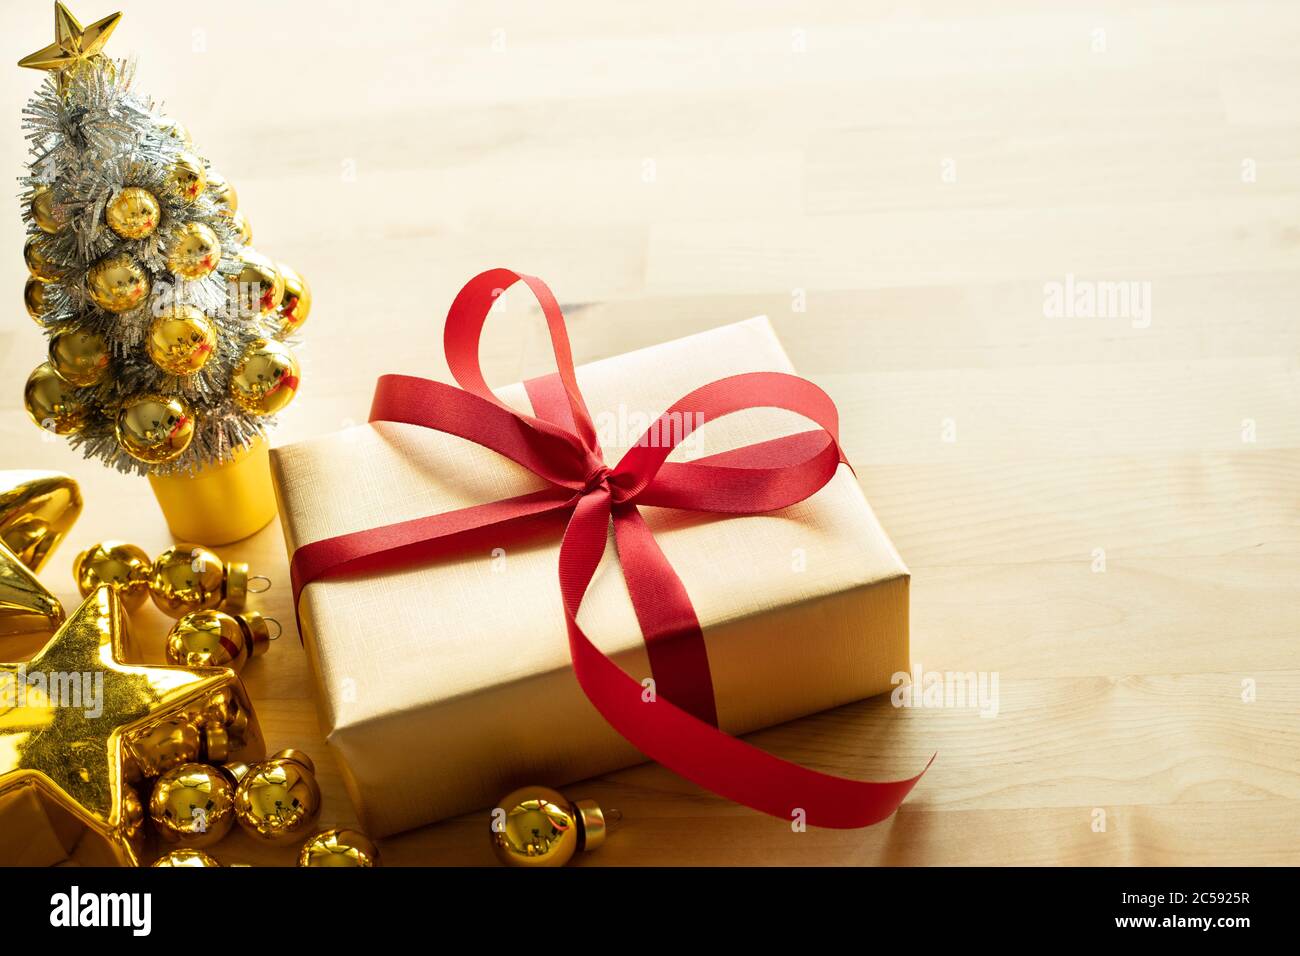 Merry christmas concepts with gift box present and ornament element on wood table background.winter season's greeting ideas.top view Stock Photo